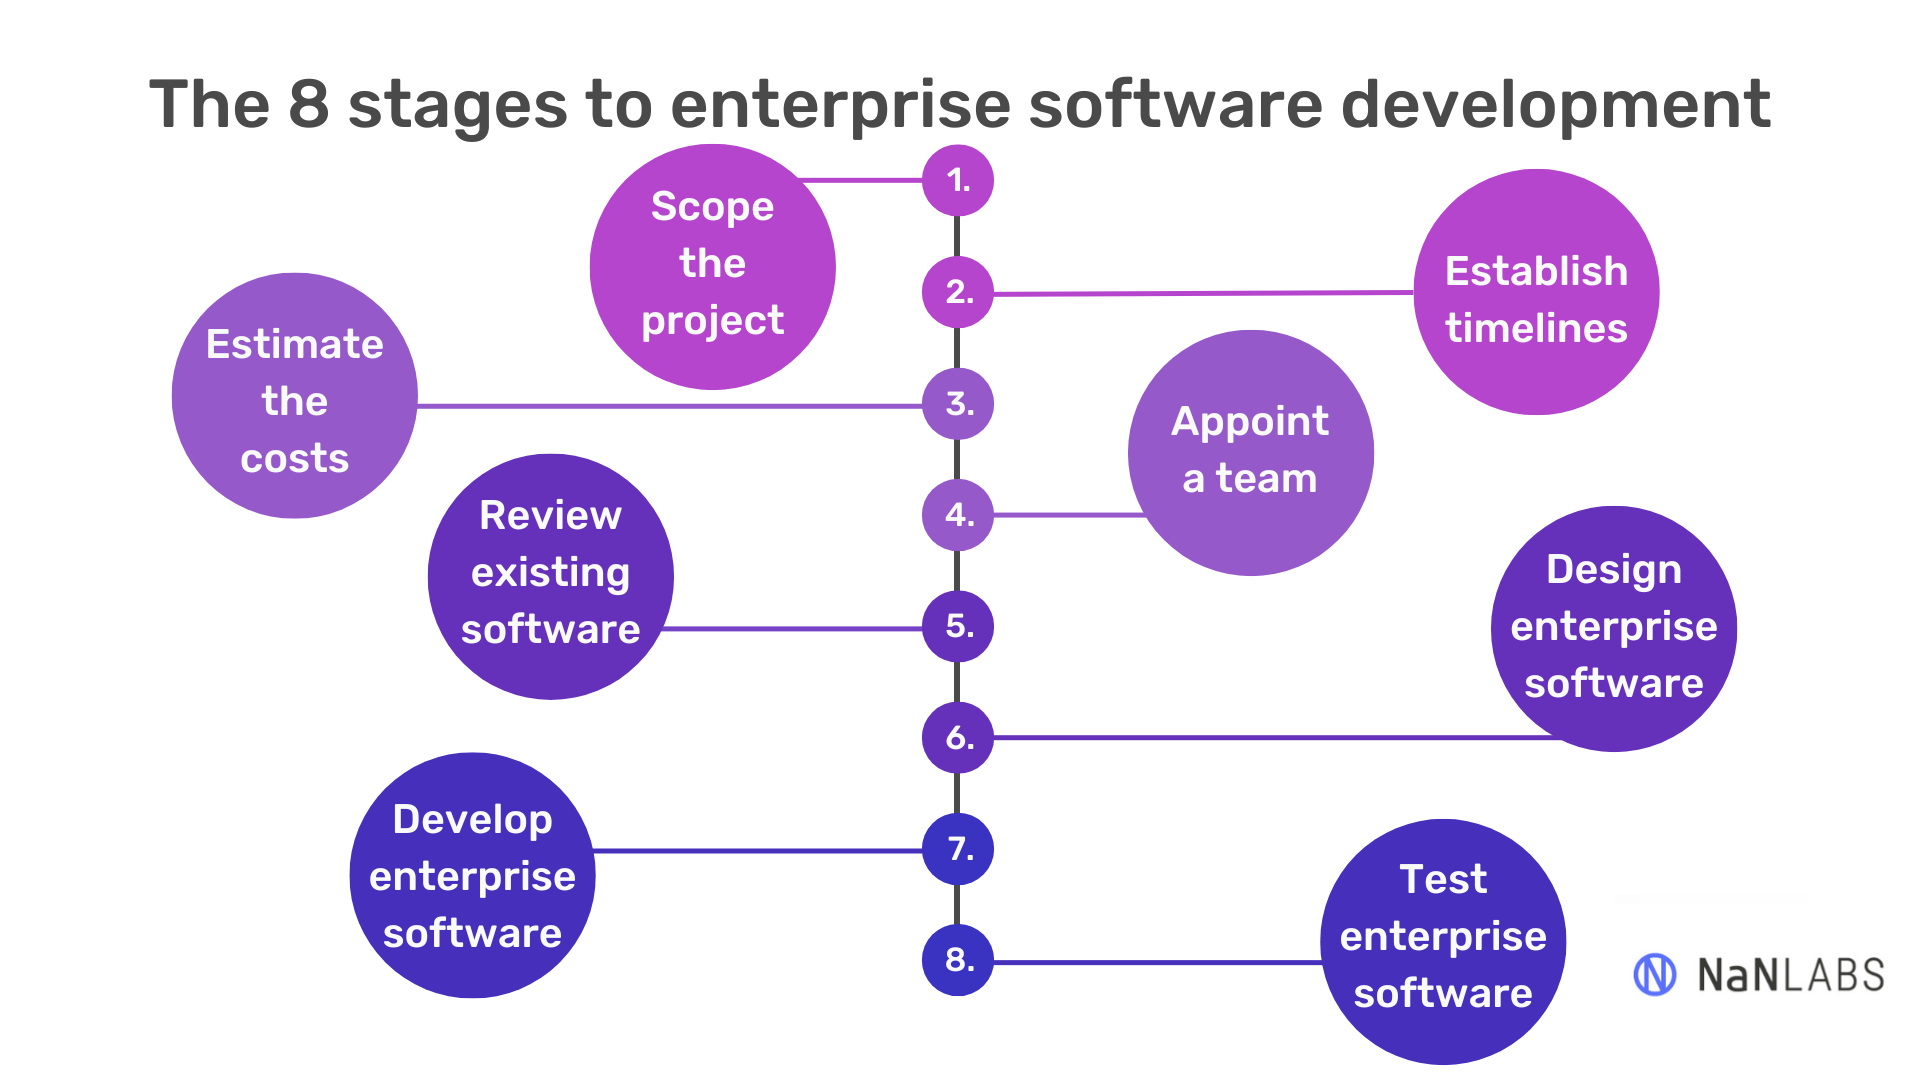 A timeline showing the 8 stages of enterprise level software development.